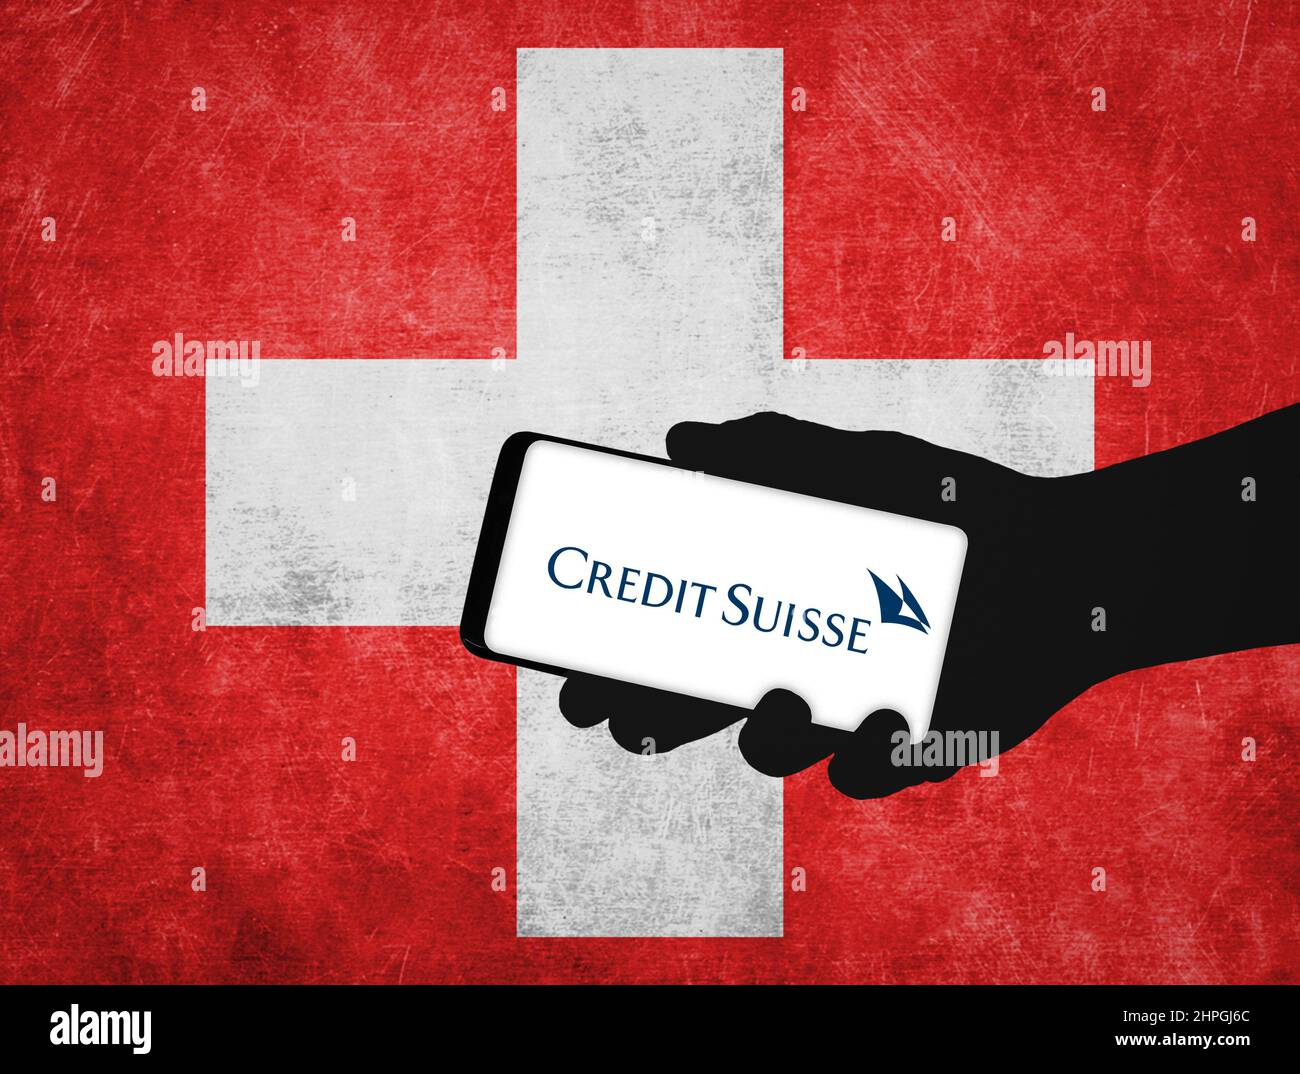 Credit Suisse - investment bank in Switzerland Stock Photo